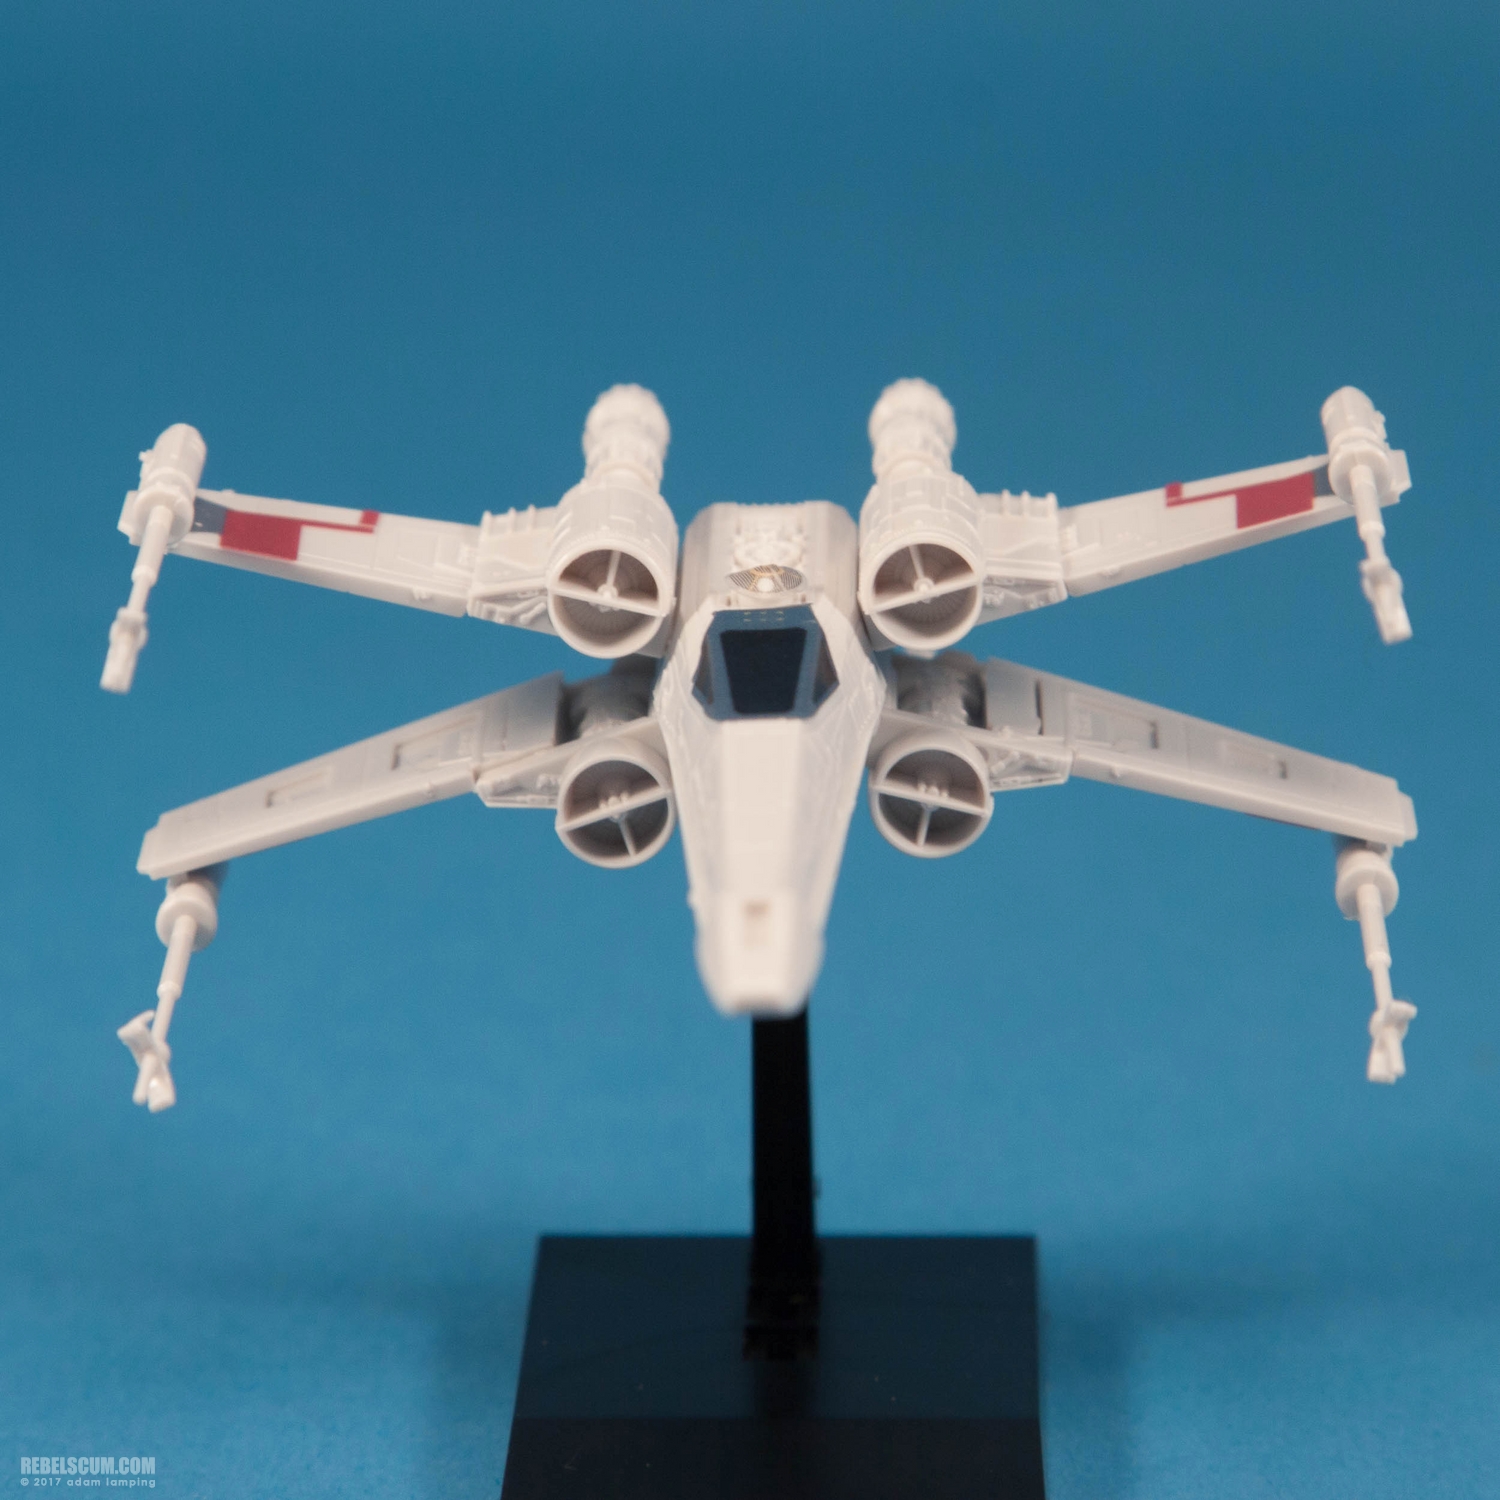 bandai-red-squadron-x-wing-starfighter-scale-model-kit-017.jpg